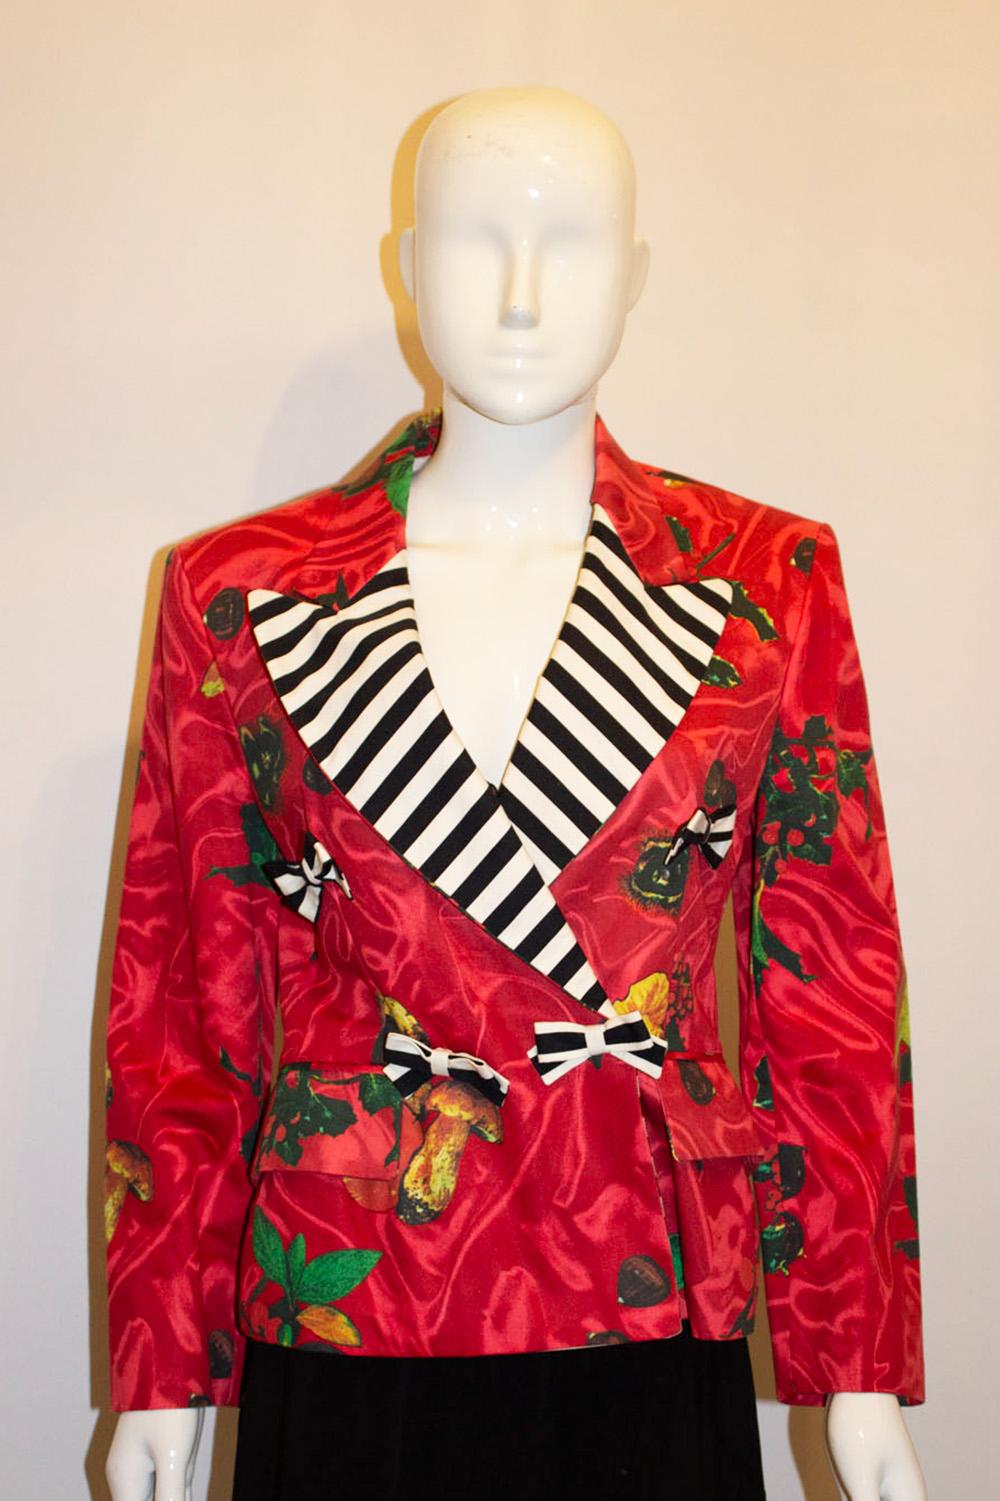 Vintage Moschino 1989 Cotton Jacket In Good Condition For Sale In London, GB